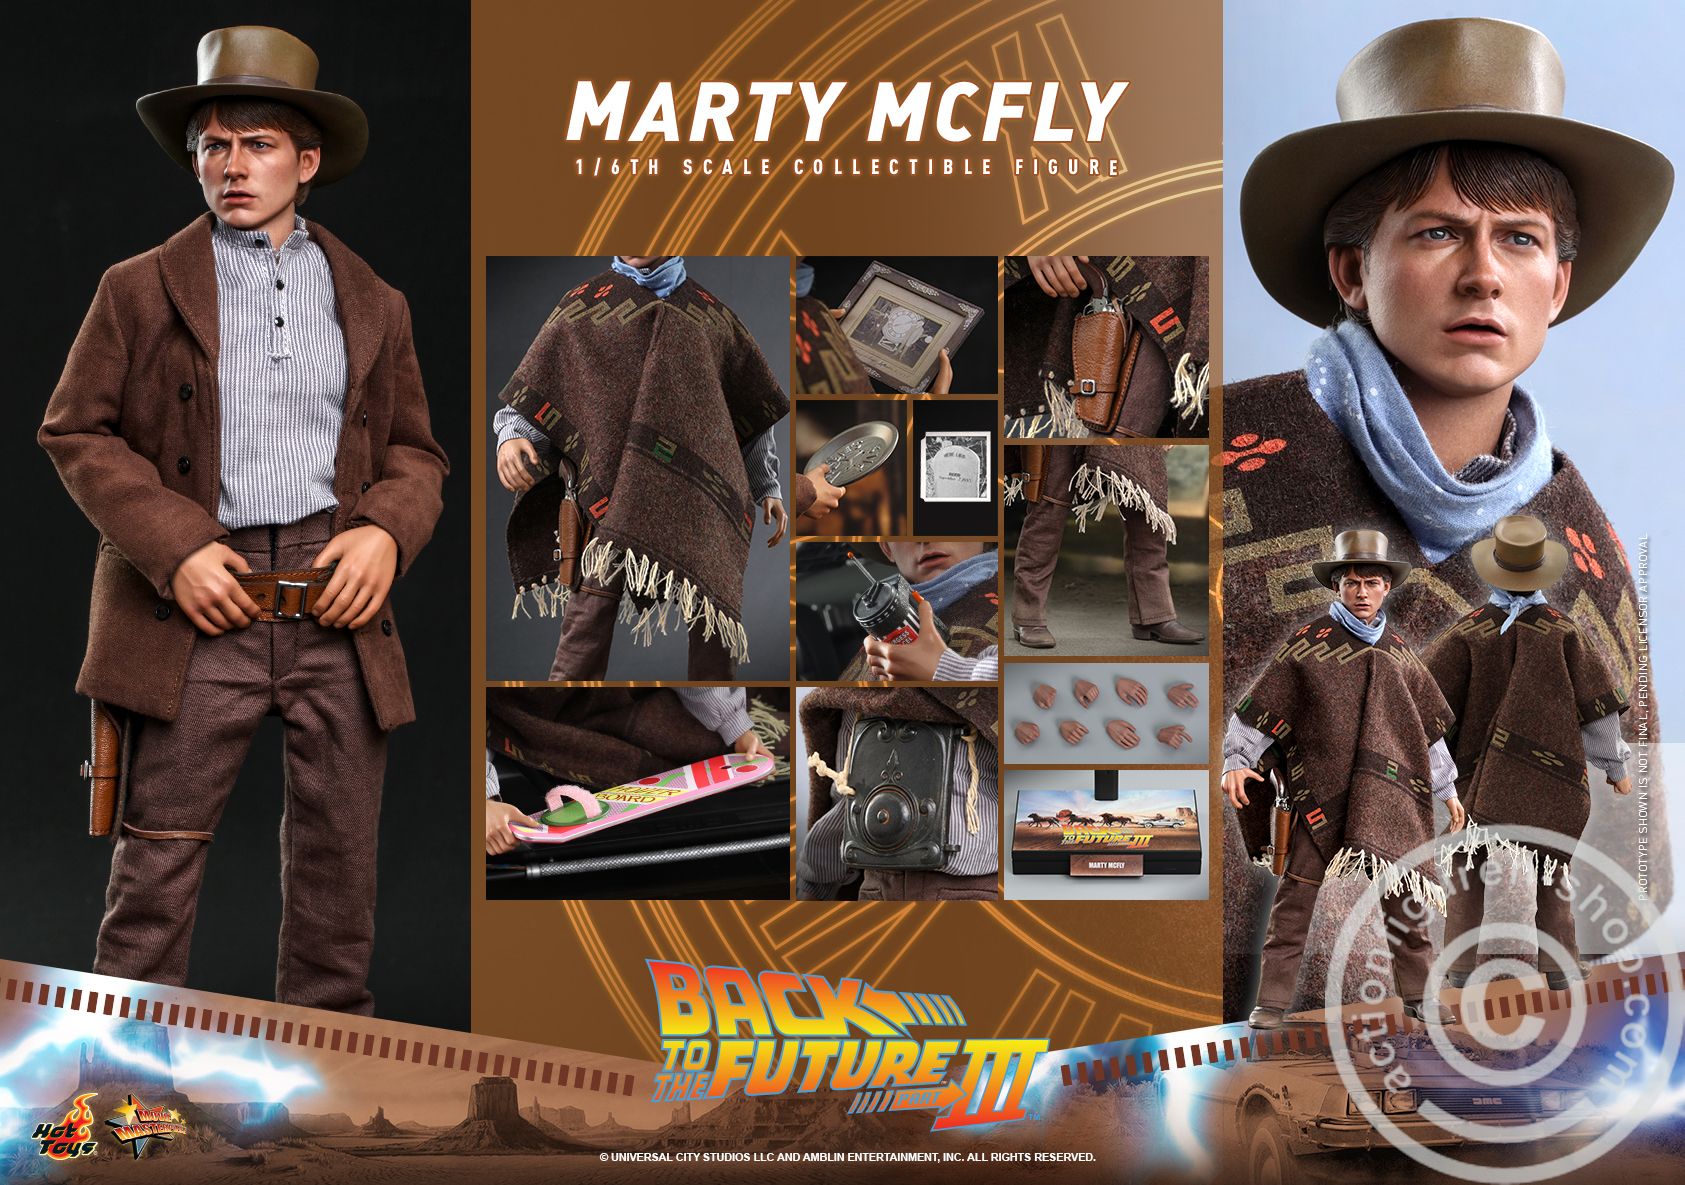 Back To The Future Part III - Marty McFly